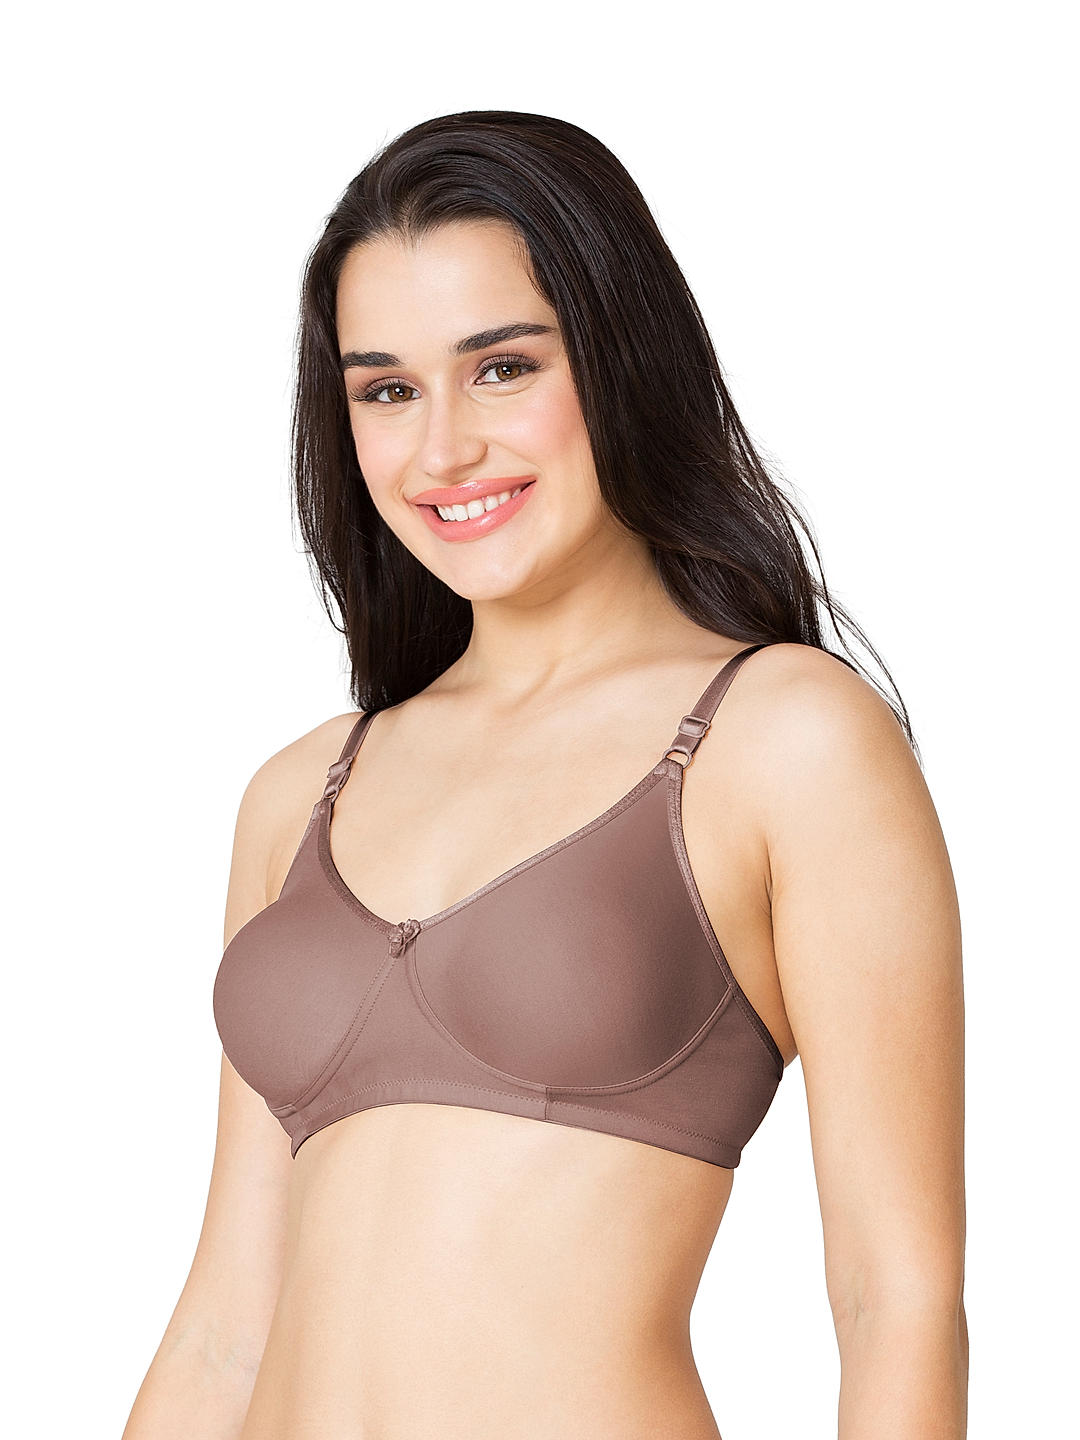 Molded Bra (M-1003) at Best Price in Ghaziabad